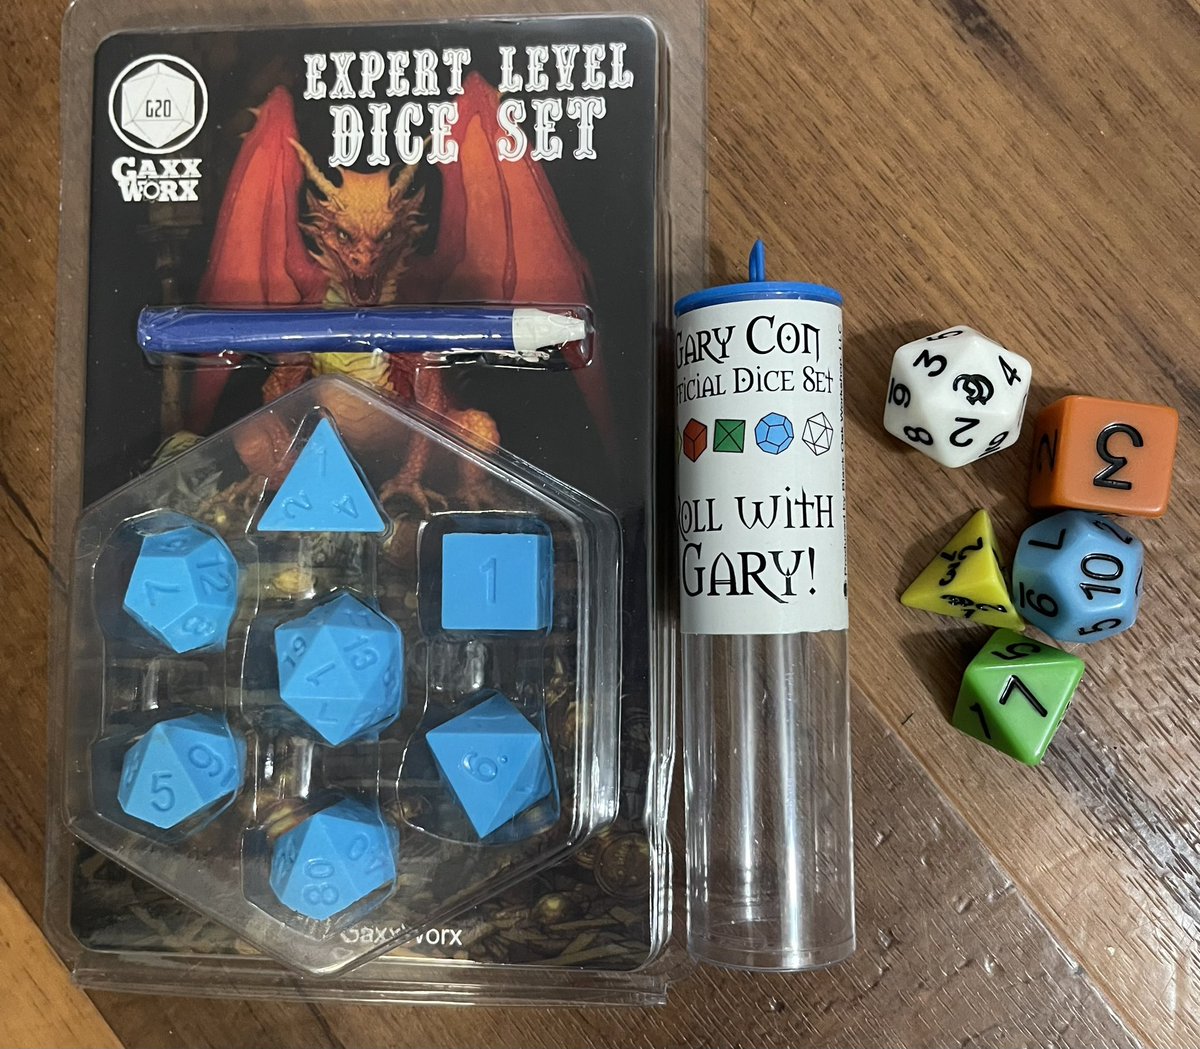 Some great swag I got @GaryCon ! A set of the Expert Level dice that look like they came out of the box set, complete with a white crayon! And the retro OD&D Roll With Gary Dice! ❤️